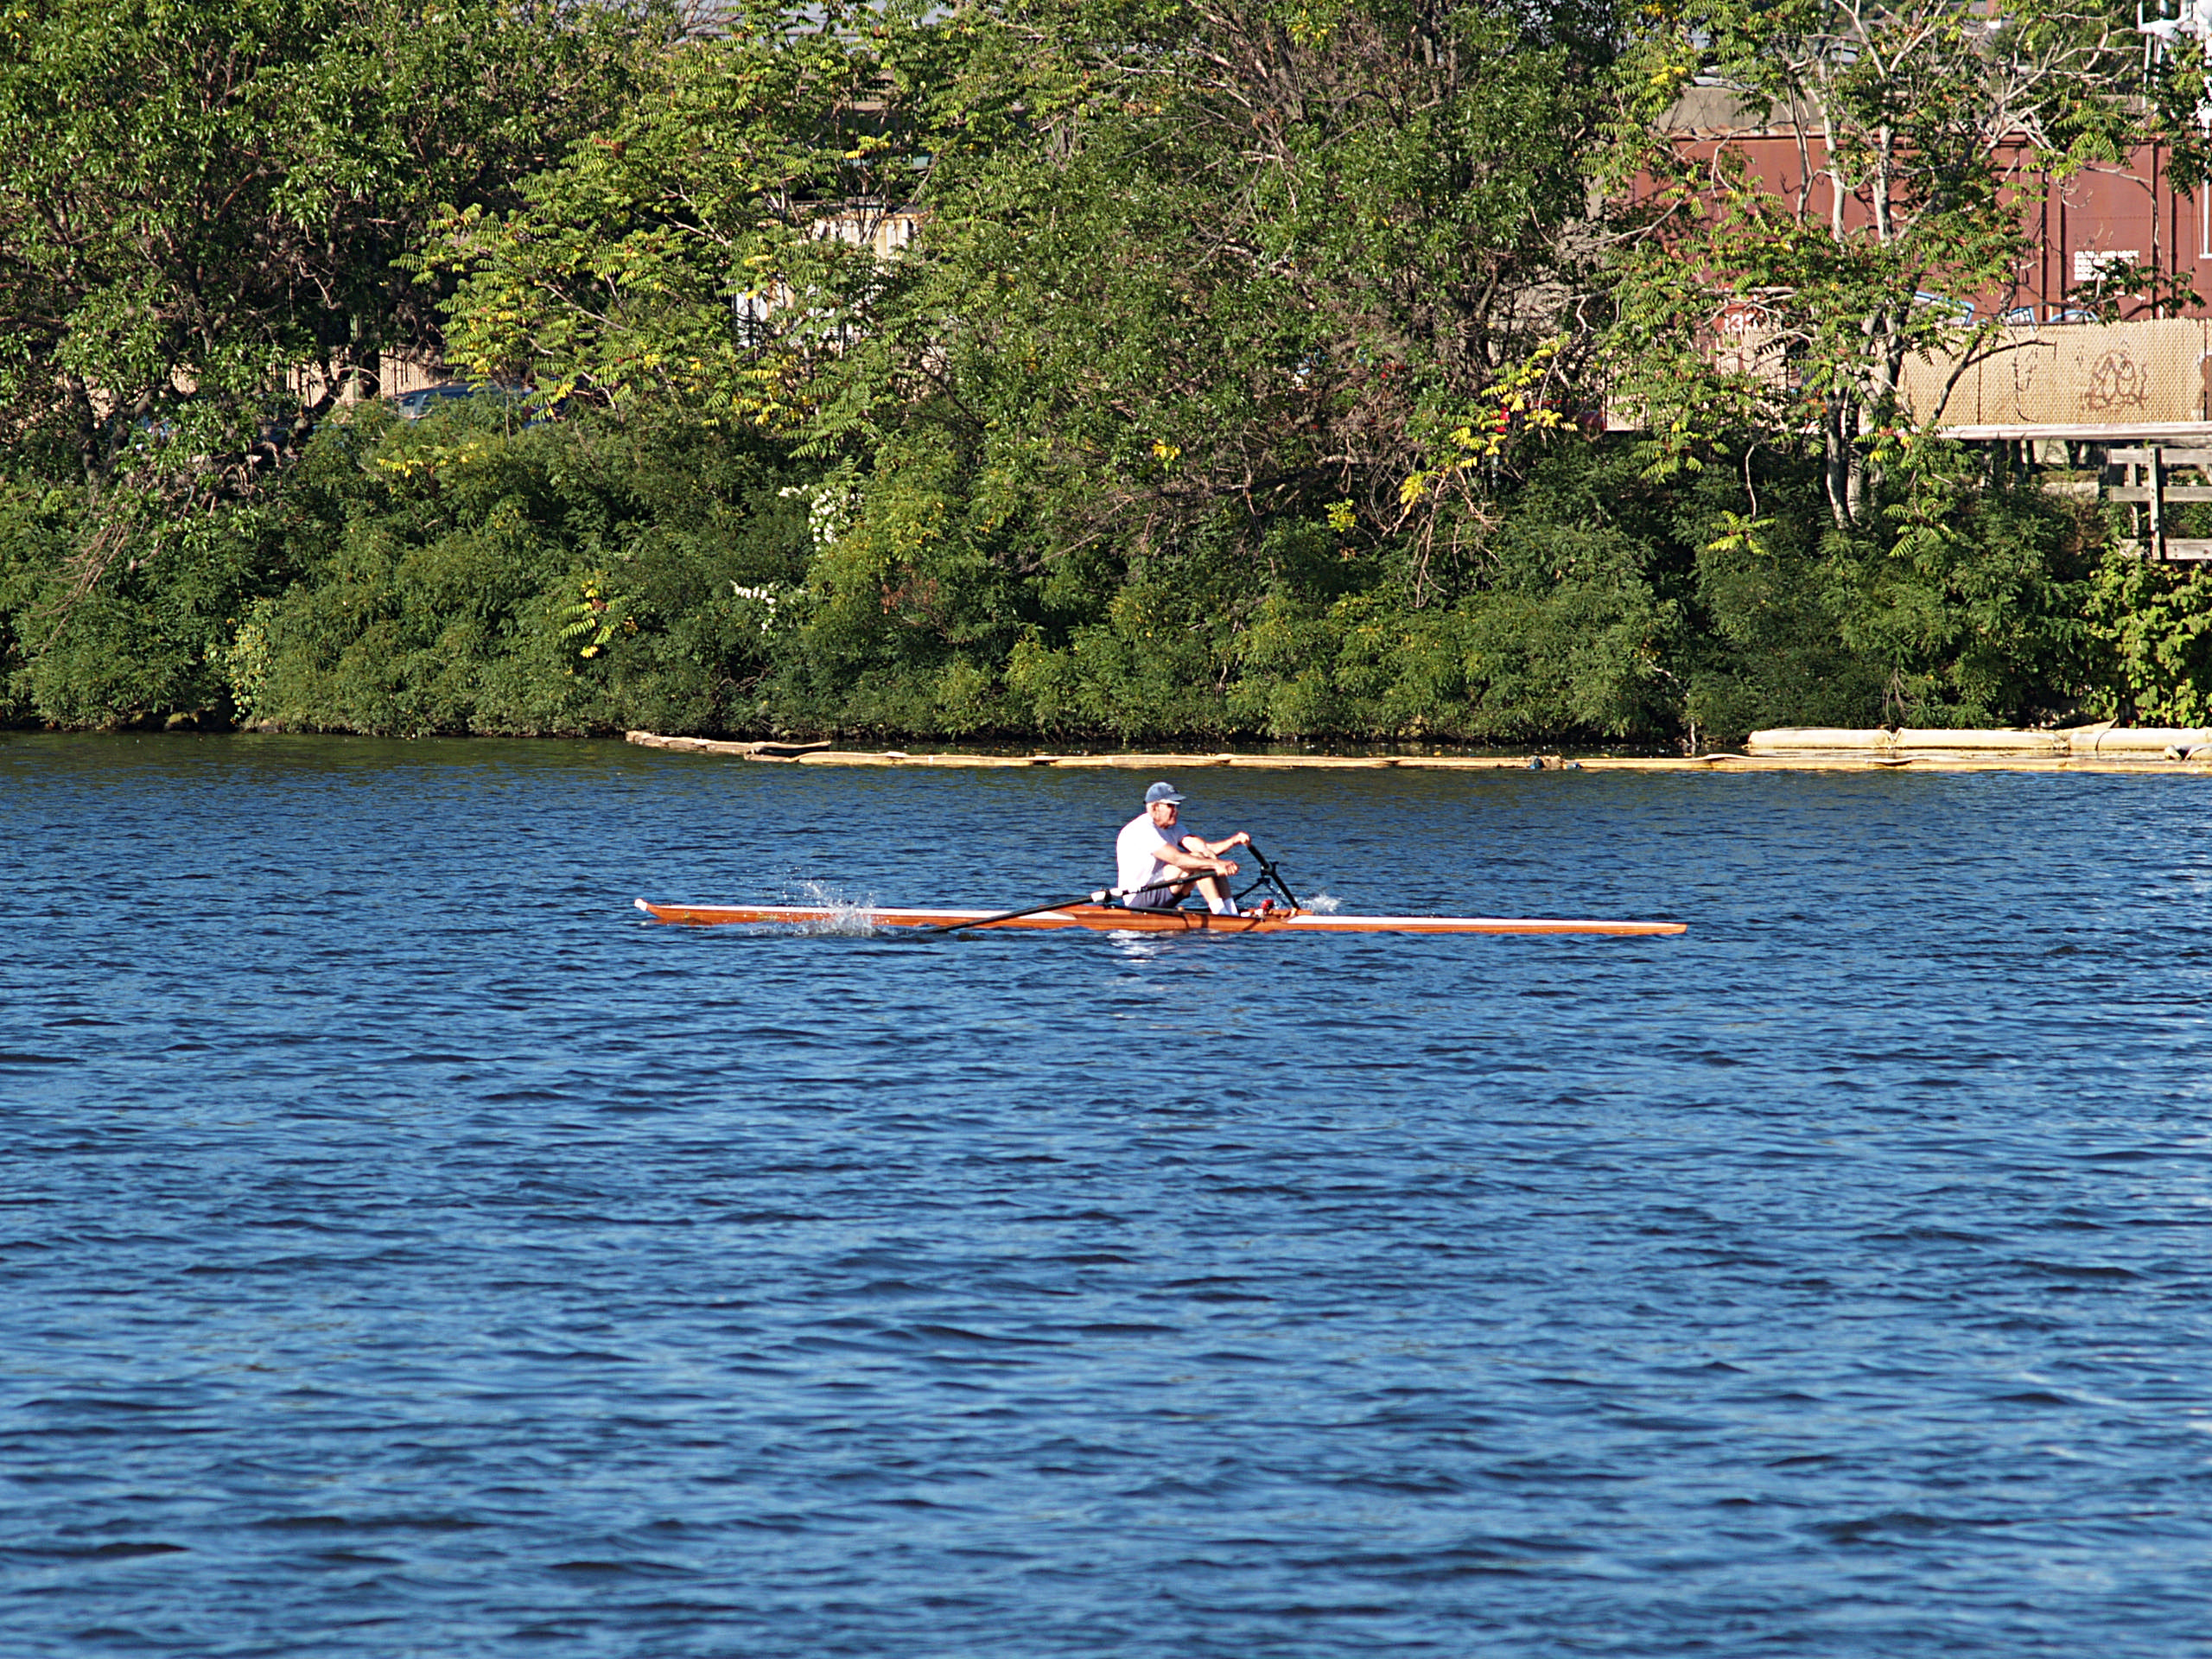 Rowing on the Charles river